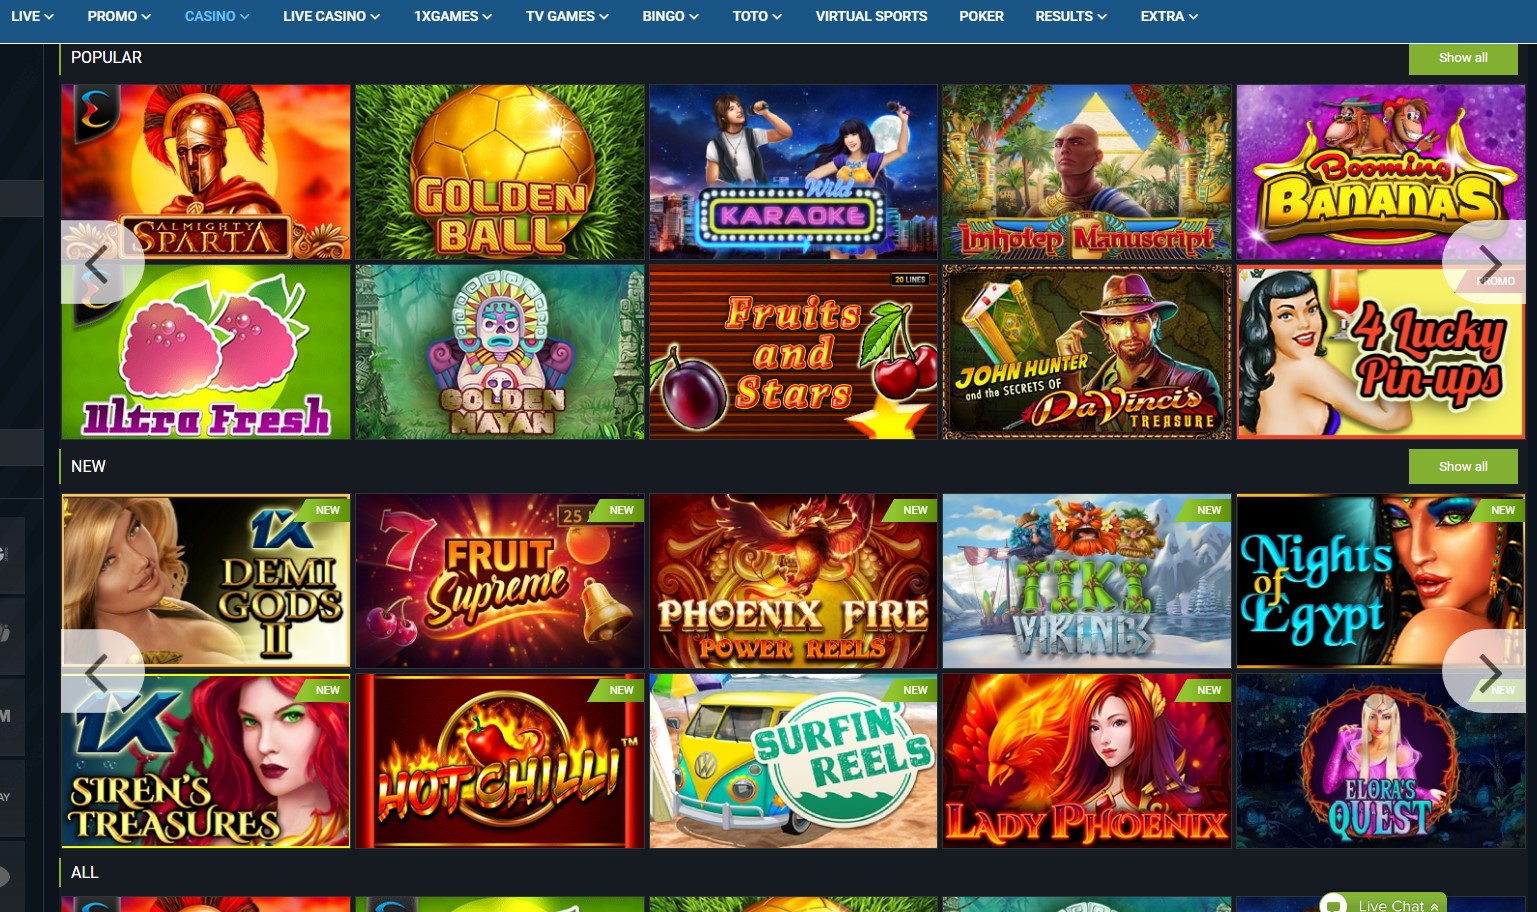 casino paypal online